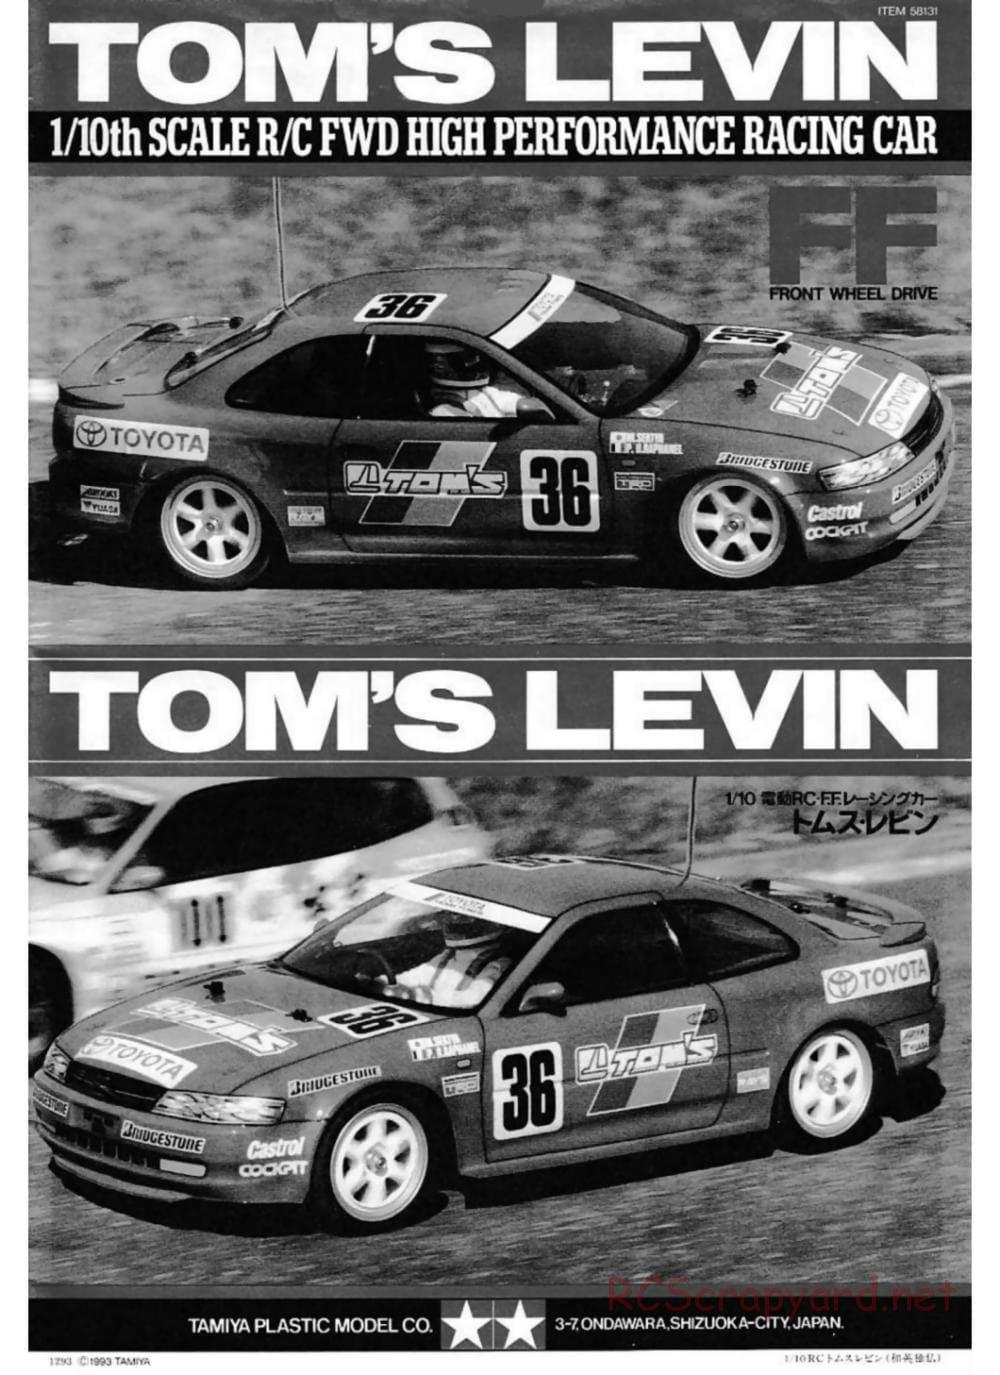 Tamiya - Toyota Tom's Levin - FF-01 Chassis - Manual - Page 1